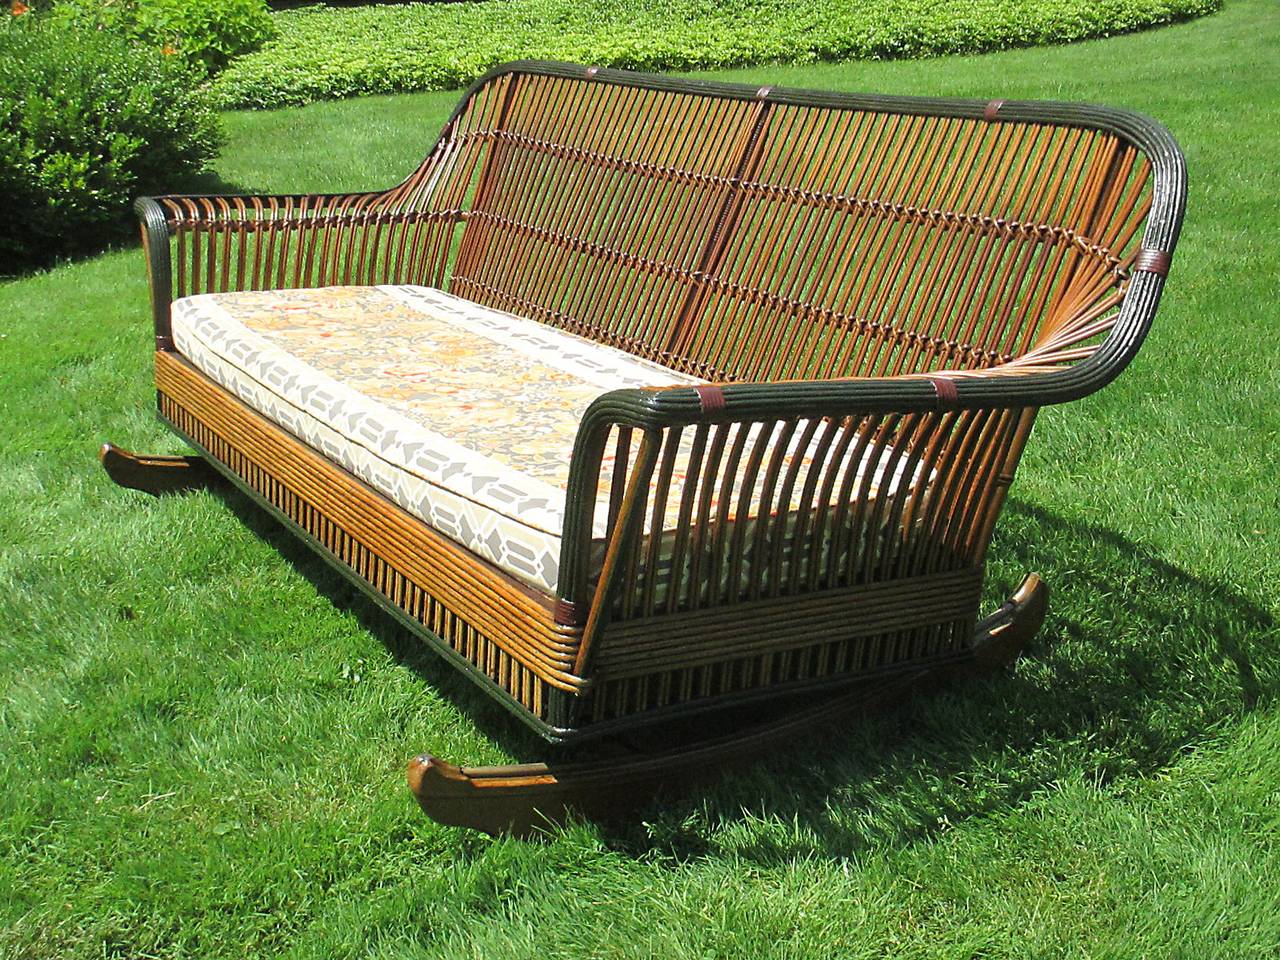 Extremely rare Stick Wicker glider.   Original metal wheels glide the piece back and forth with old fashioned ease on a wooden platform.  The length (83